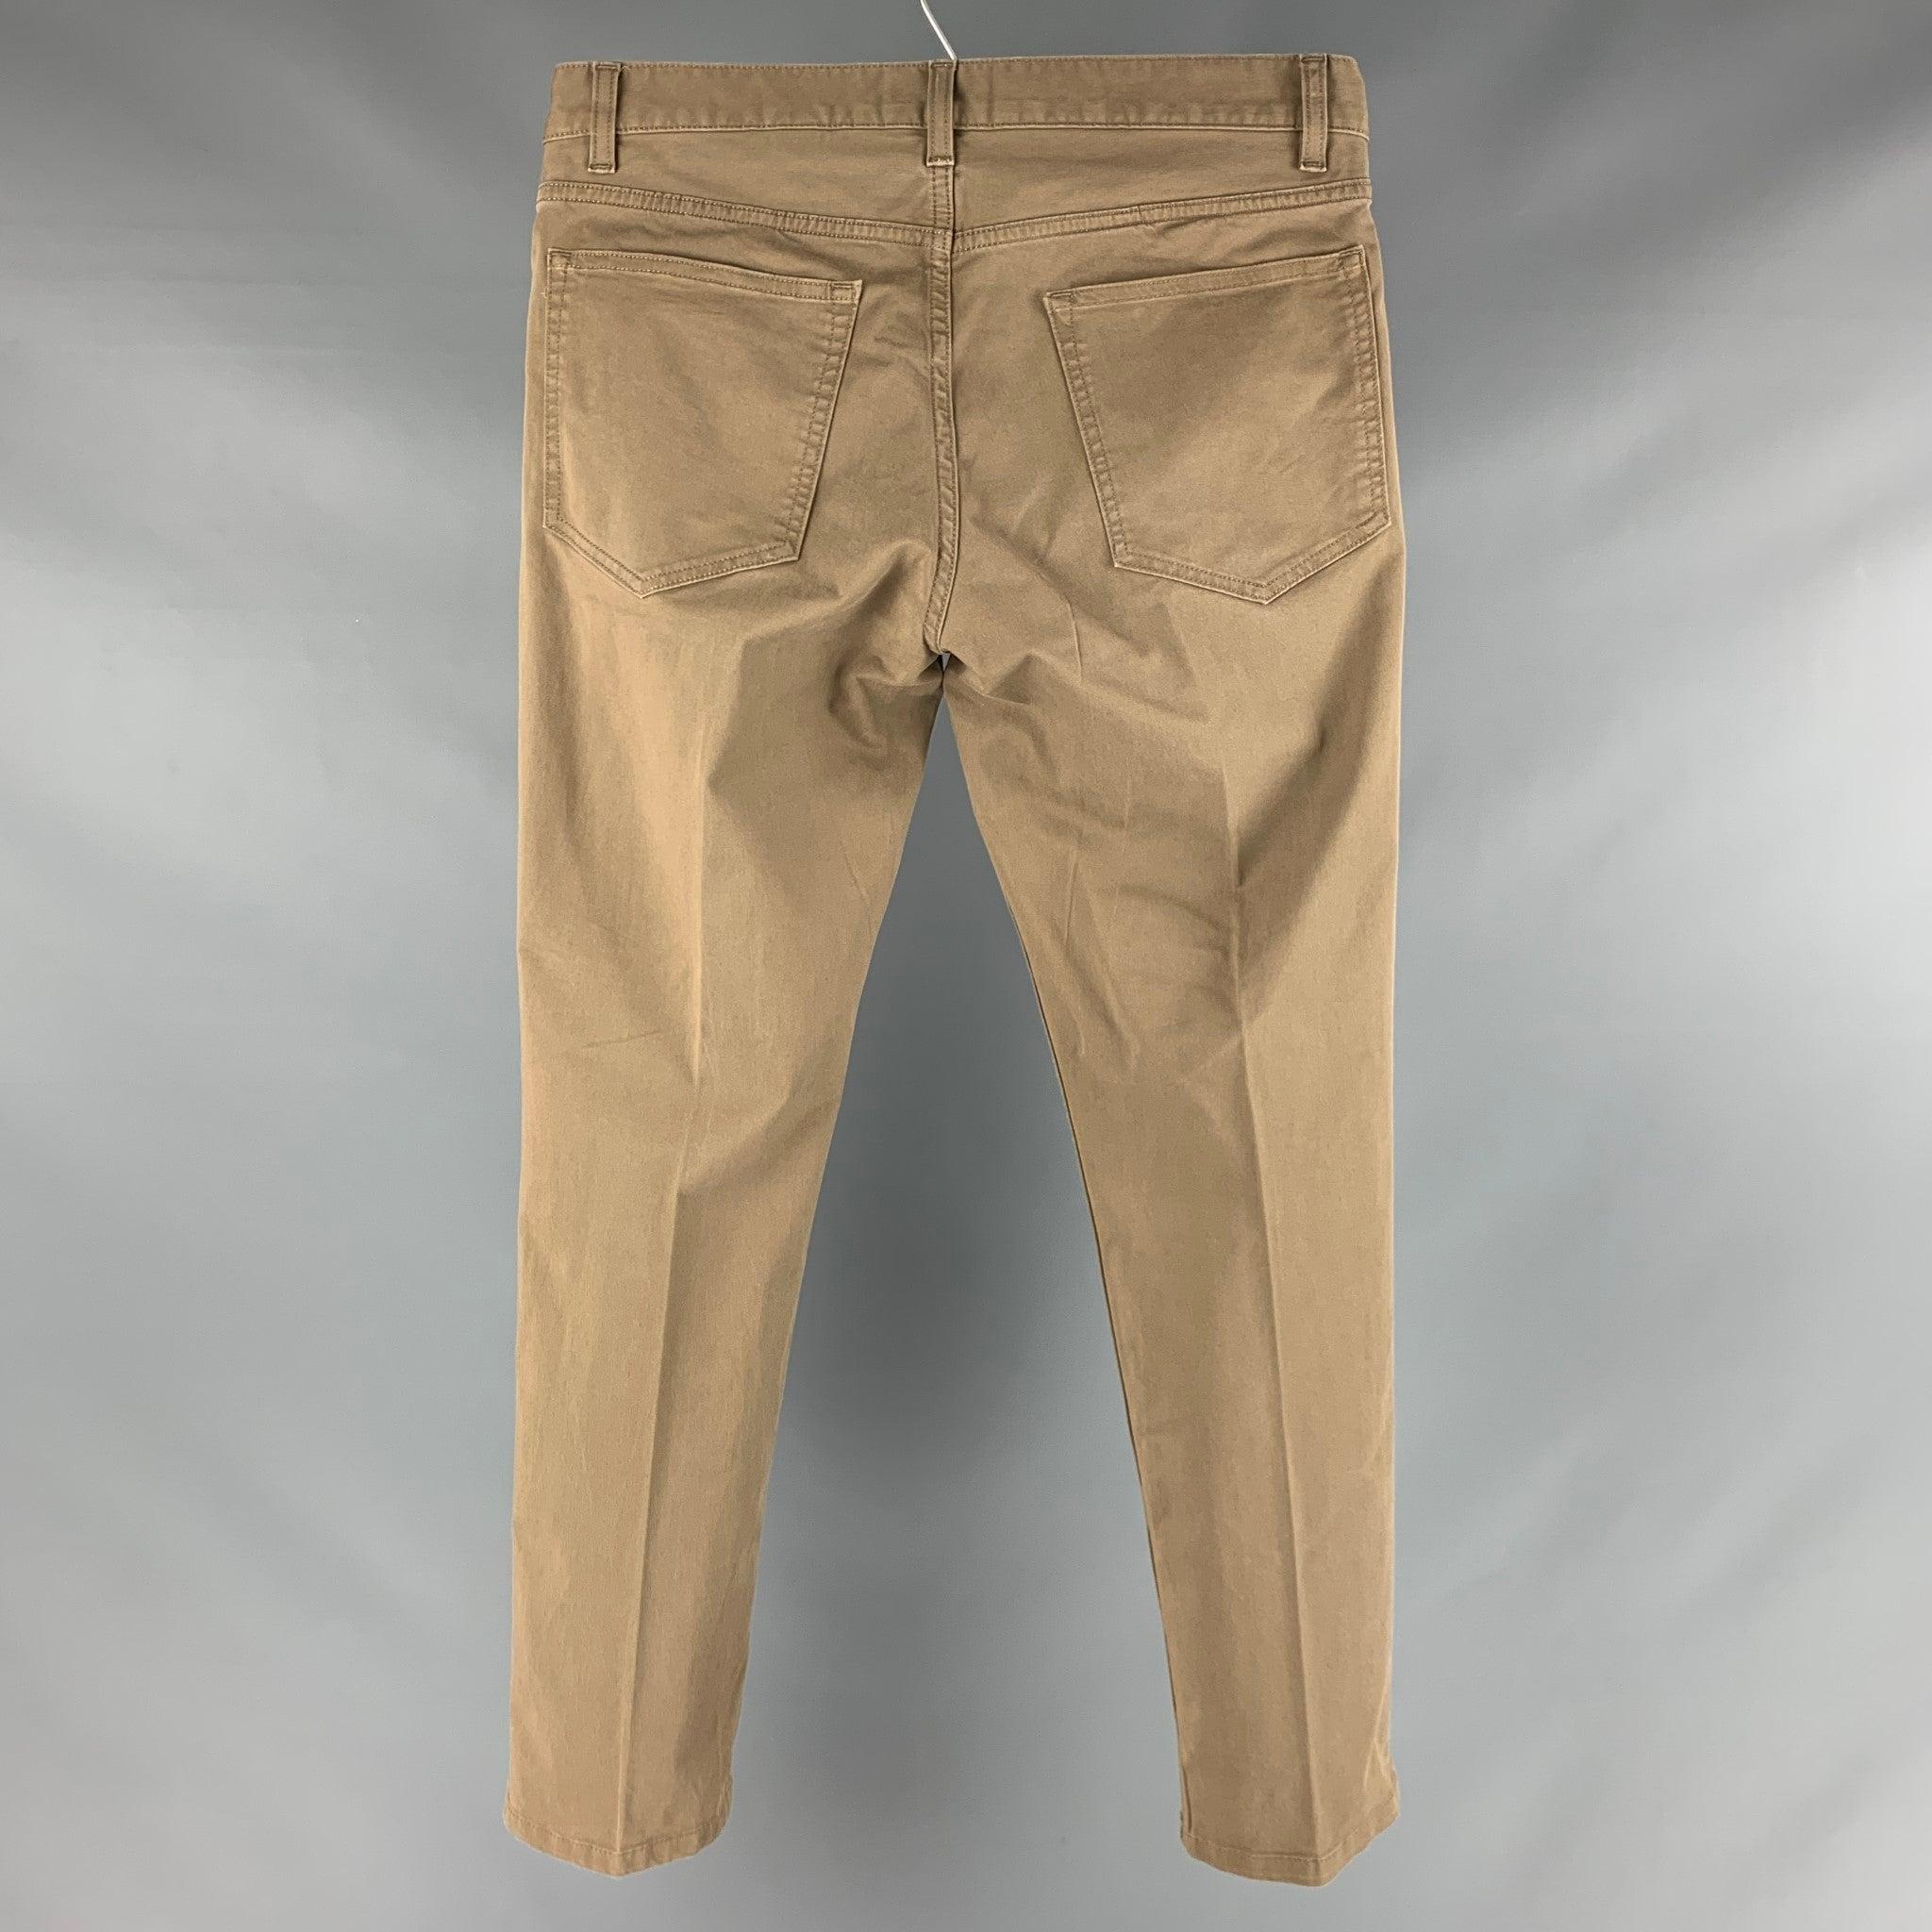 THEORY casual pants comes in a khaki cotton elastane twill featuring a haydin straight
 slim fit, flat front and a zip fly closure.Excellent Pre- Owned Material. 

Marked:   30 

Measurements: 
  Waist: 30 inches Rise: 8 inches Inseam: 28.5 inches 
